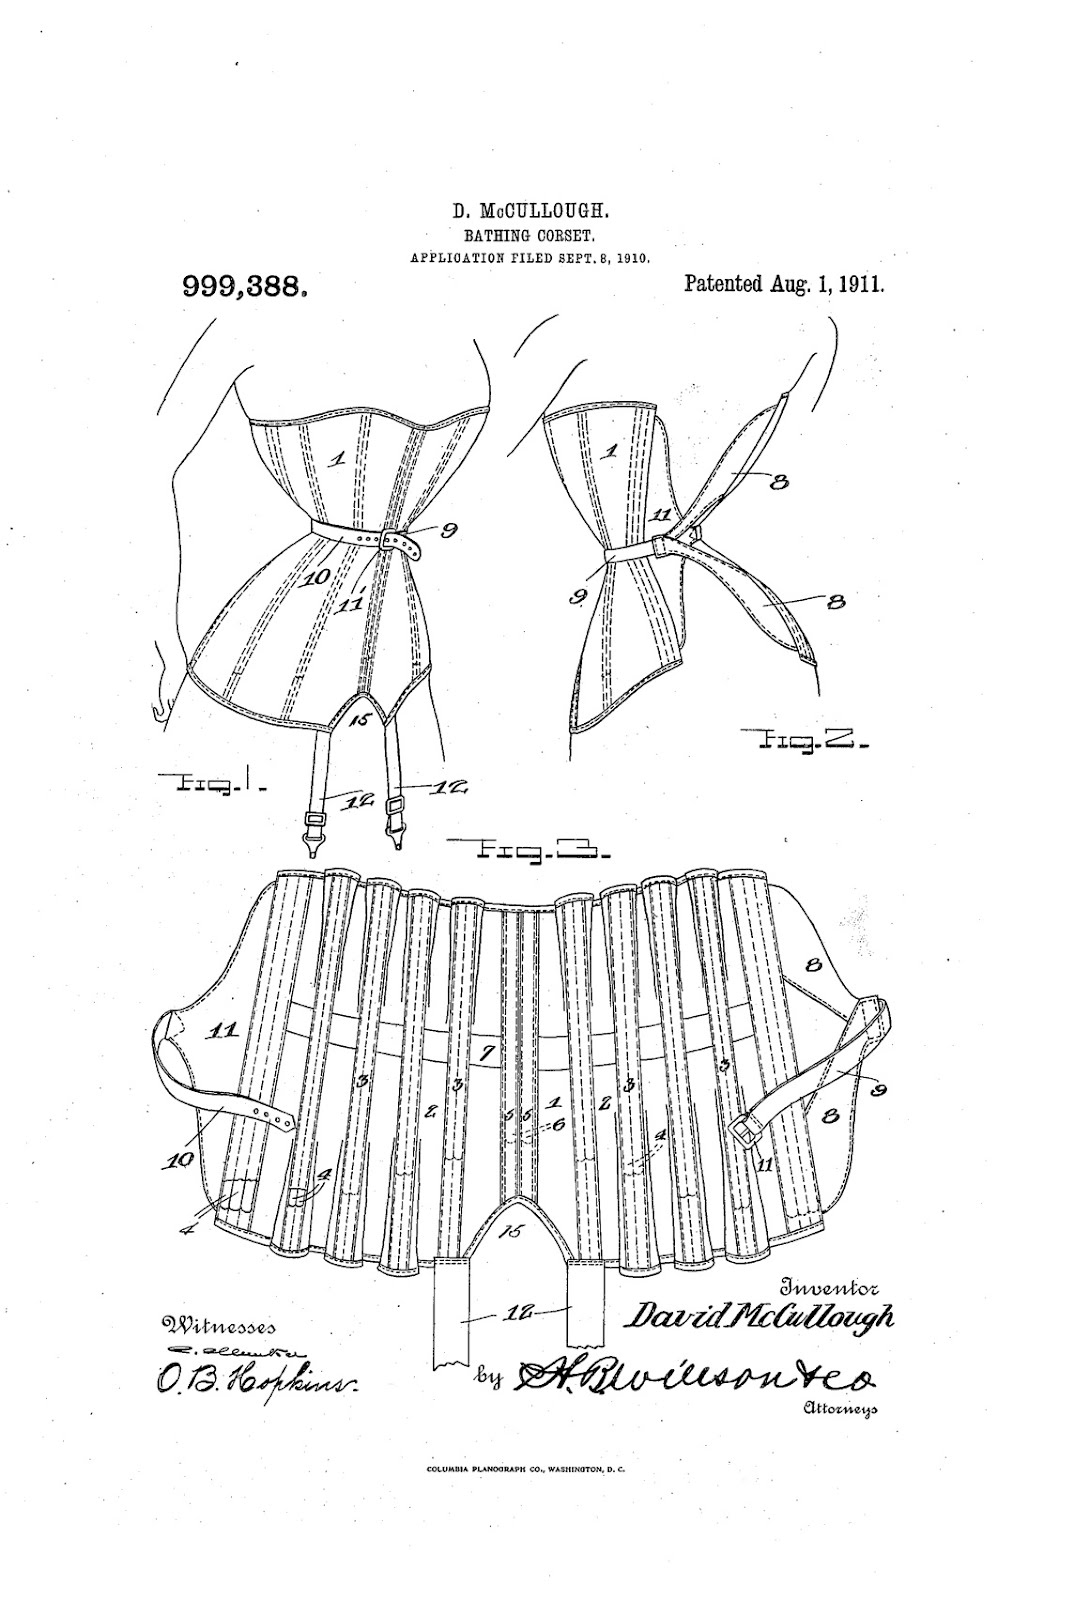 Bridges on the Body: a completely different 1911 corset